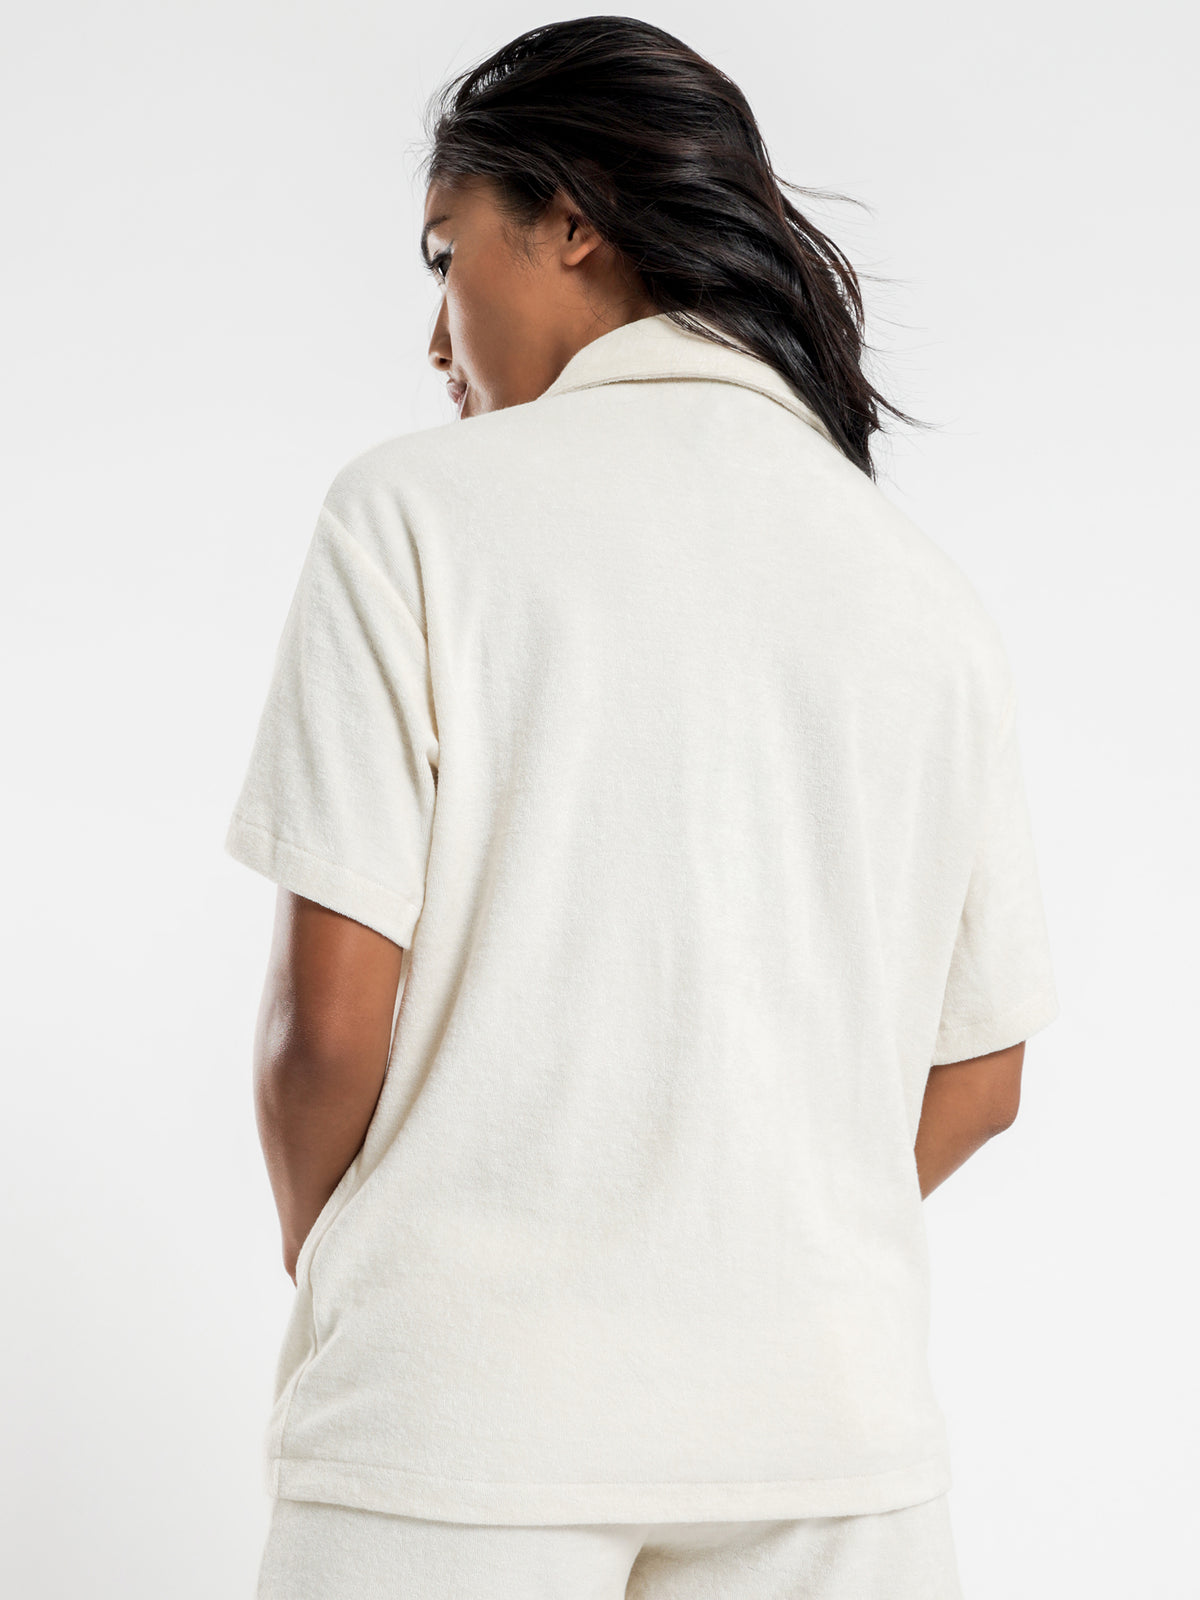 Copyright Looped Terry Shirt in White Sand